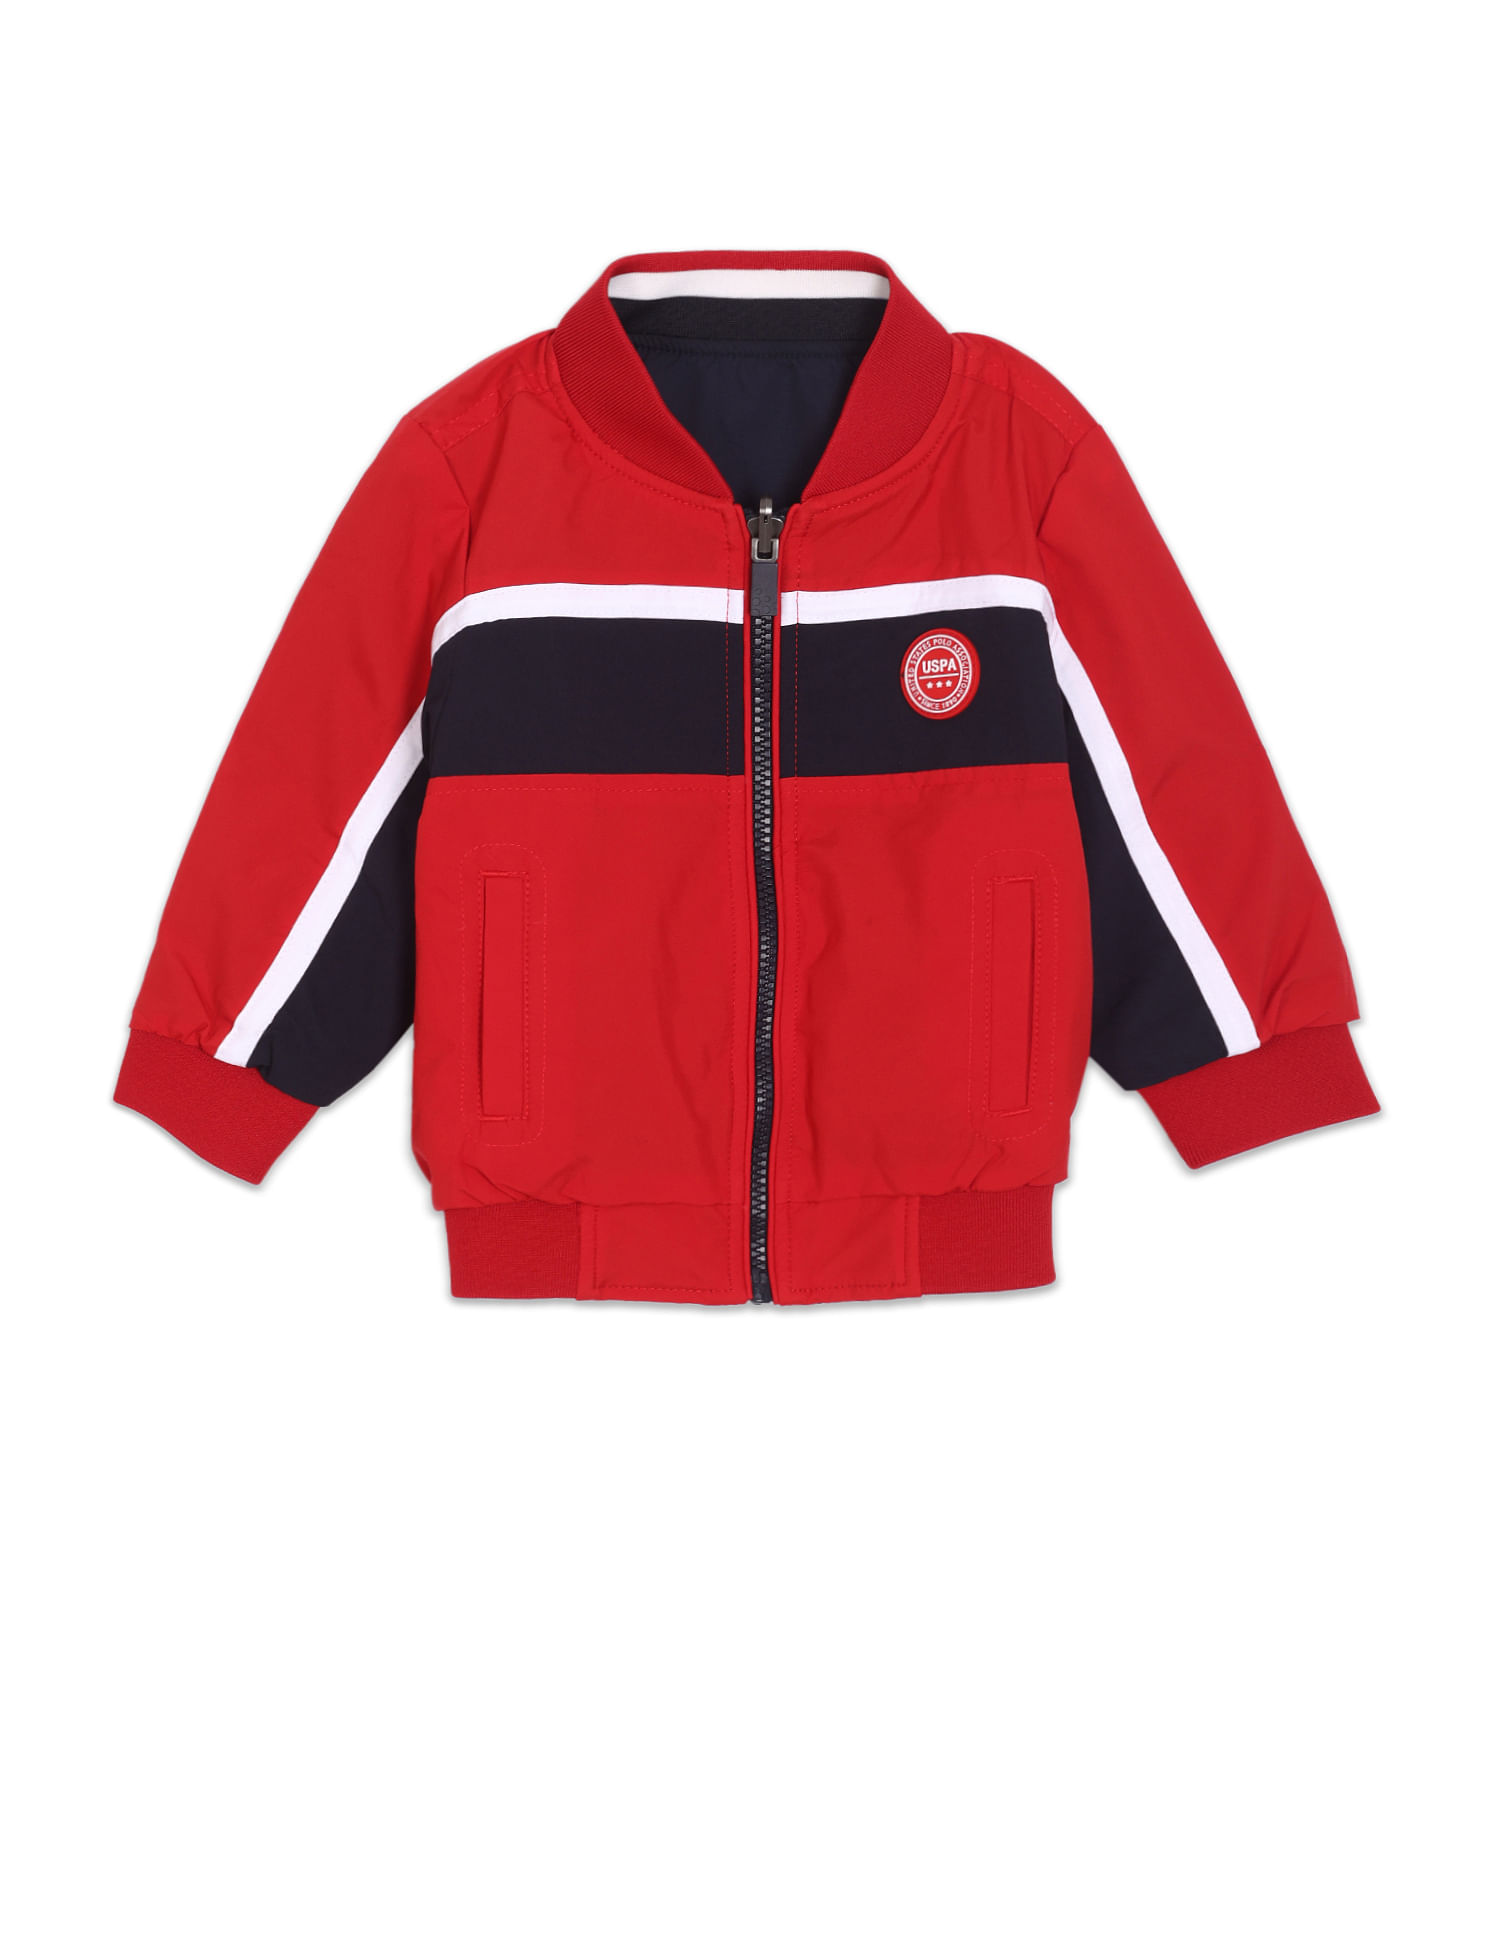 Boys Jackets - Buy Jacket for Boys Online Upto 70% off from Myntra.-anthinhphatland.vn